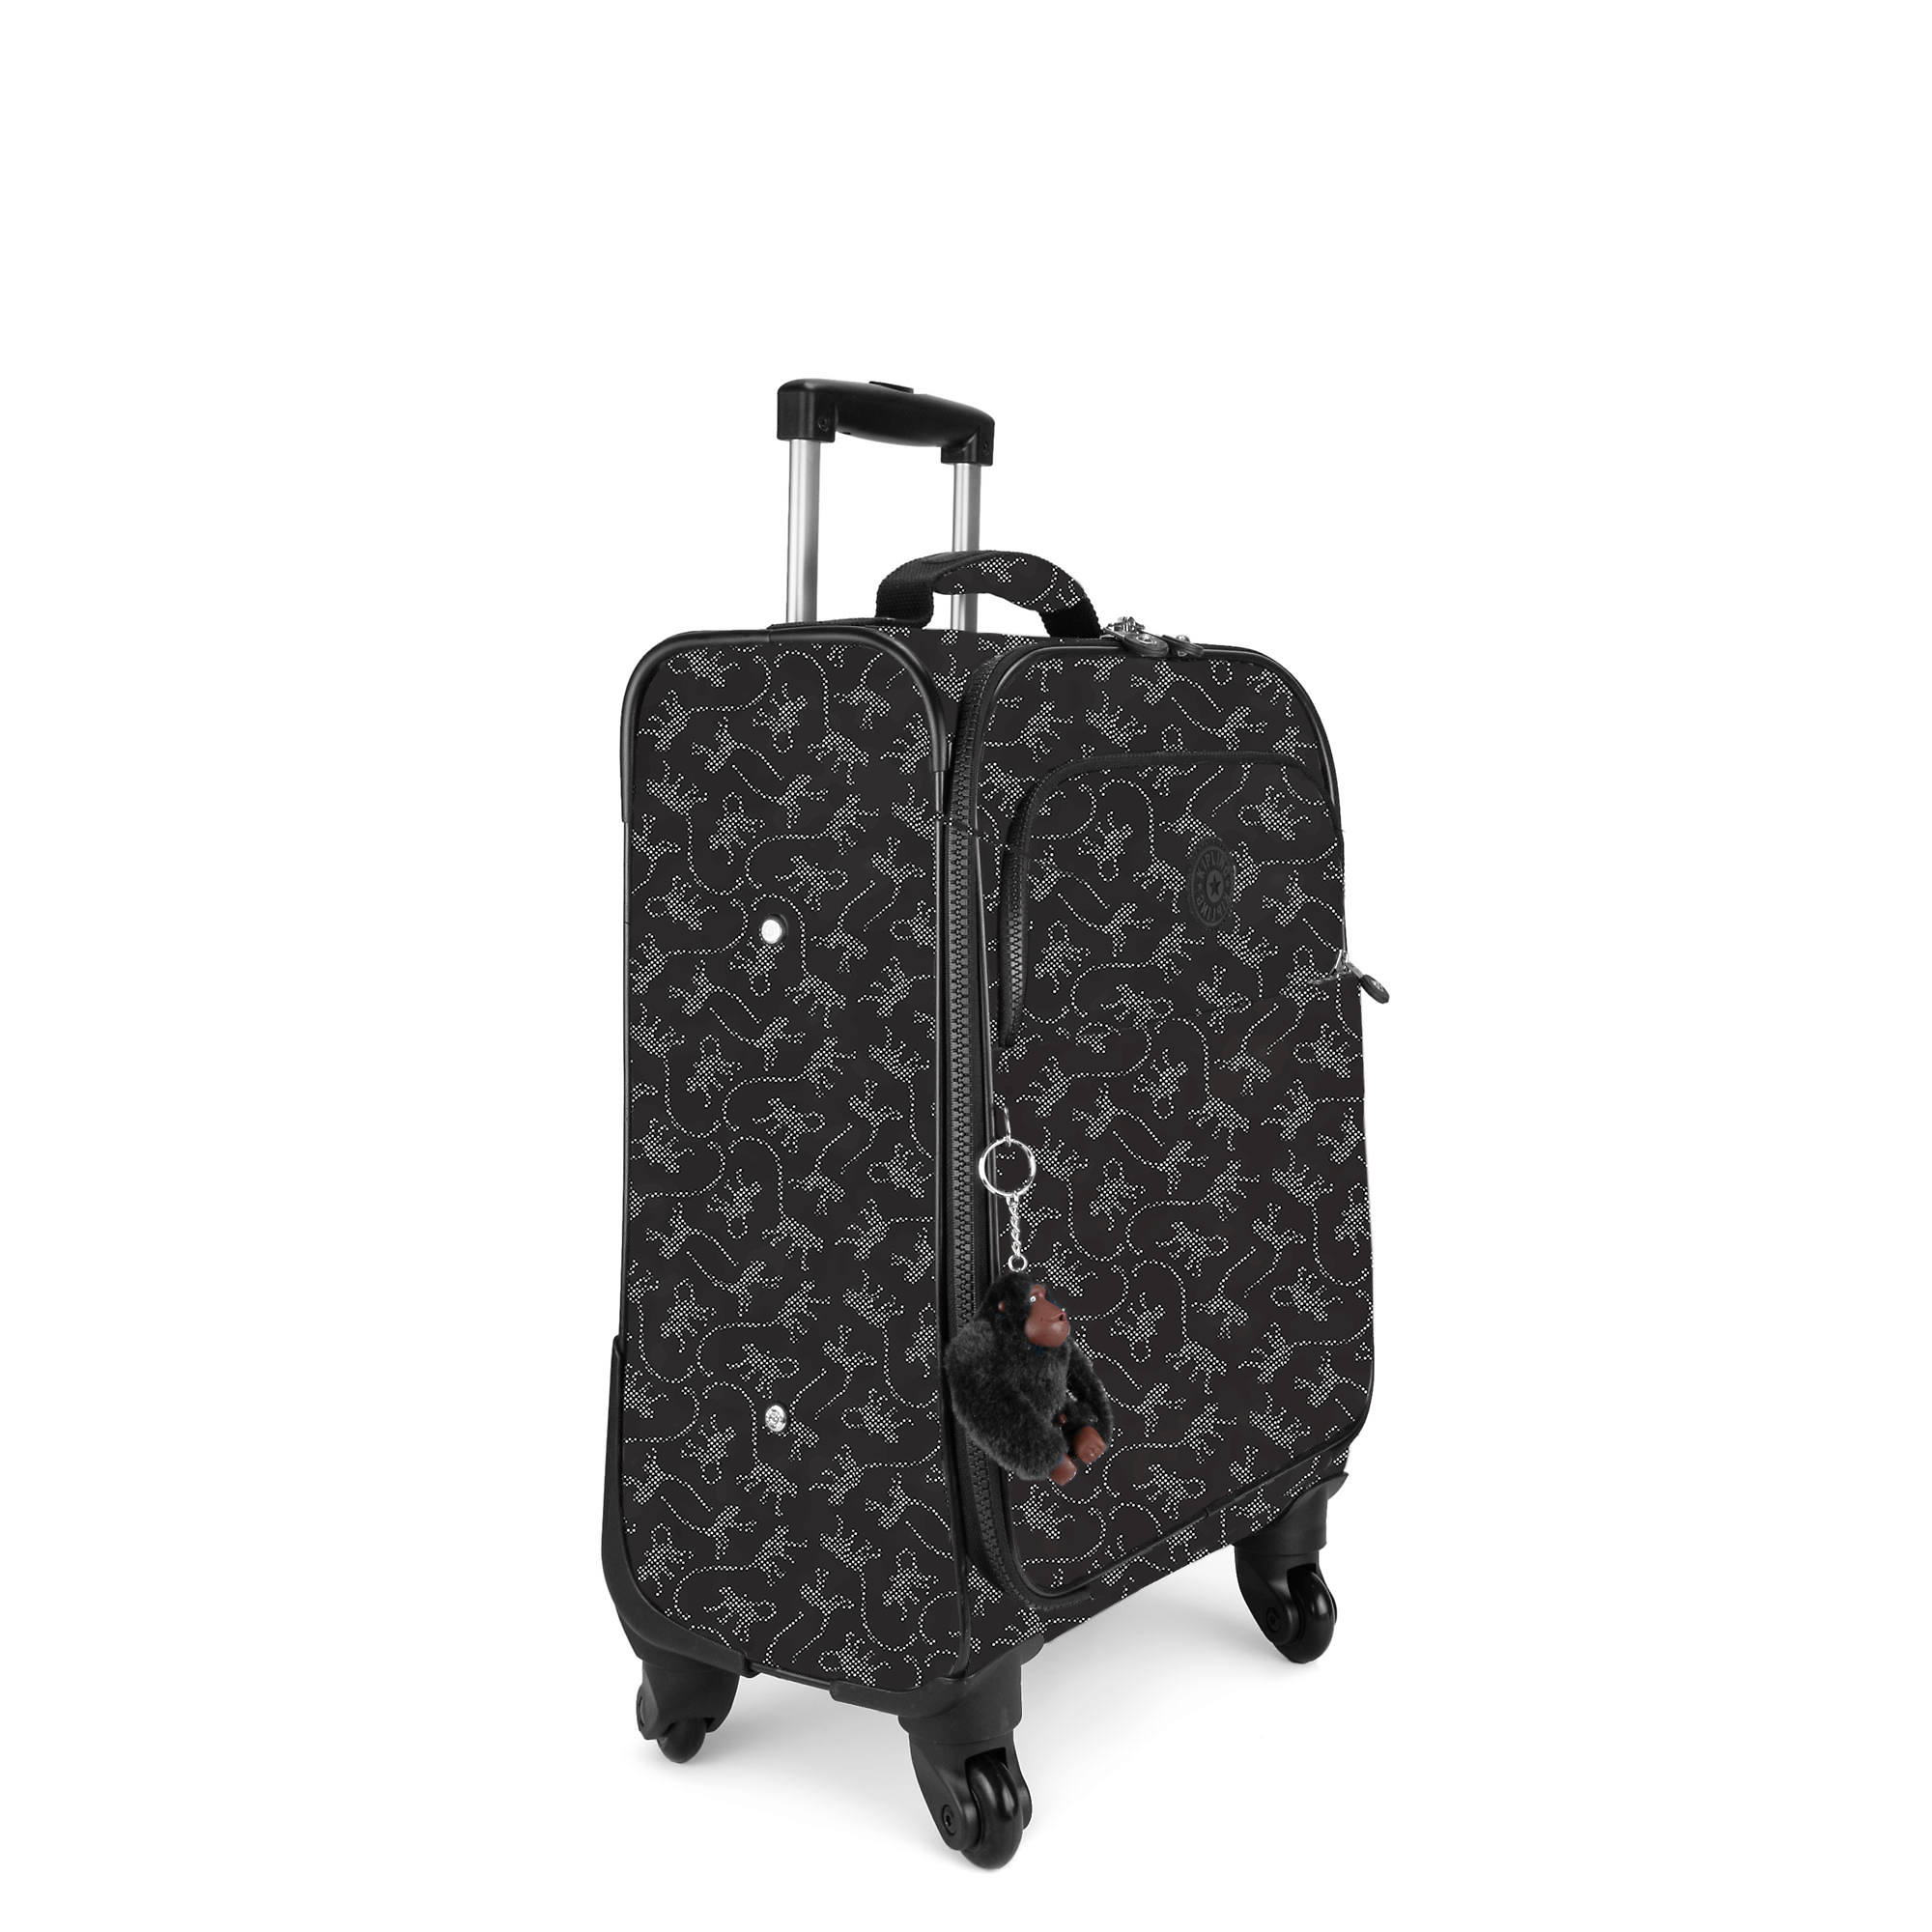 Kipling Parker Small Printed Wheeled Carry-On Luggage | eBay